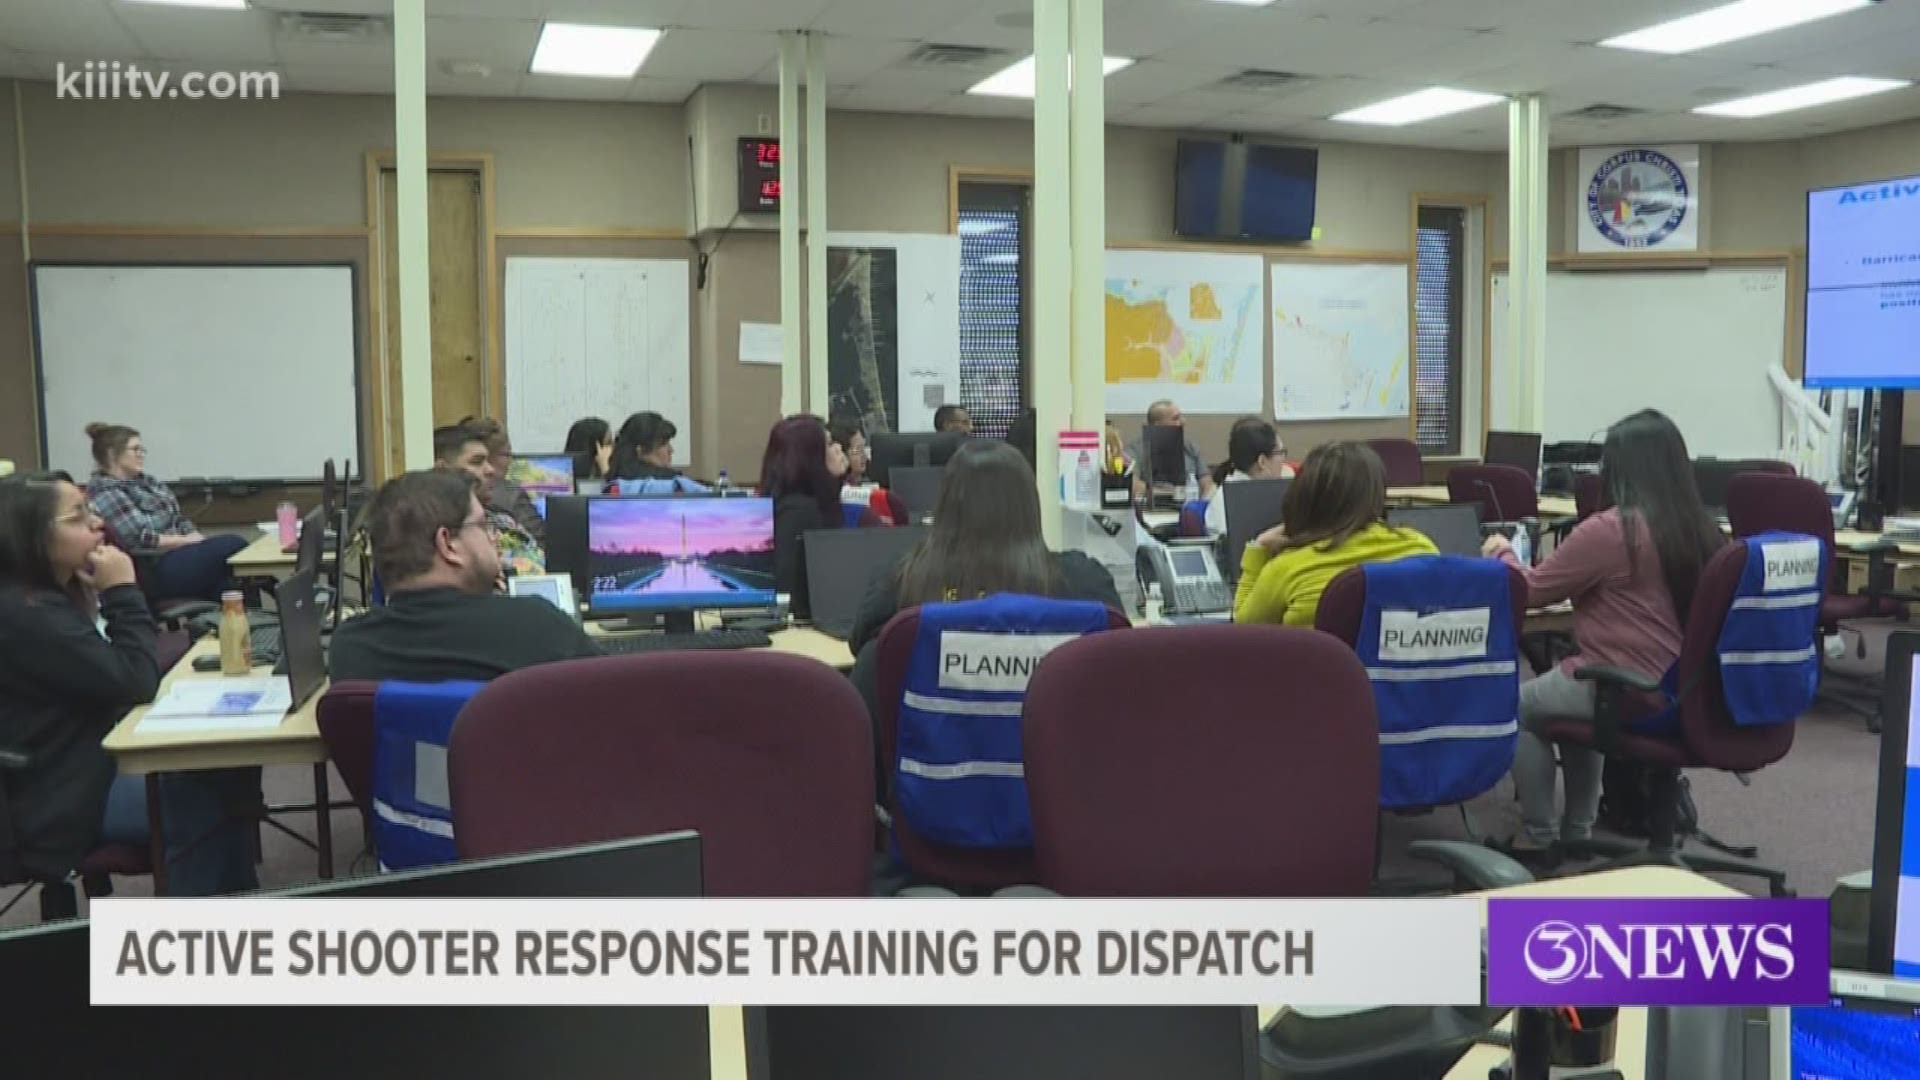 Active shooter response training for dispatch